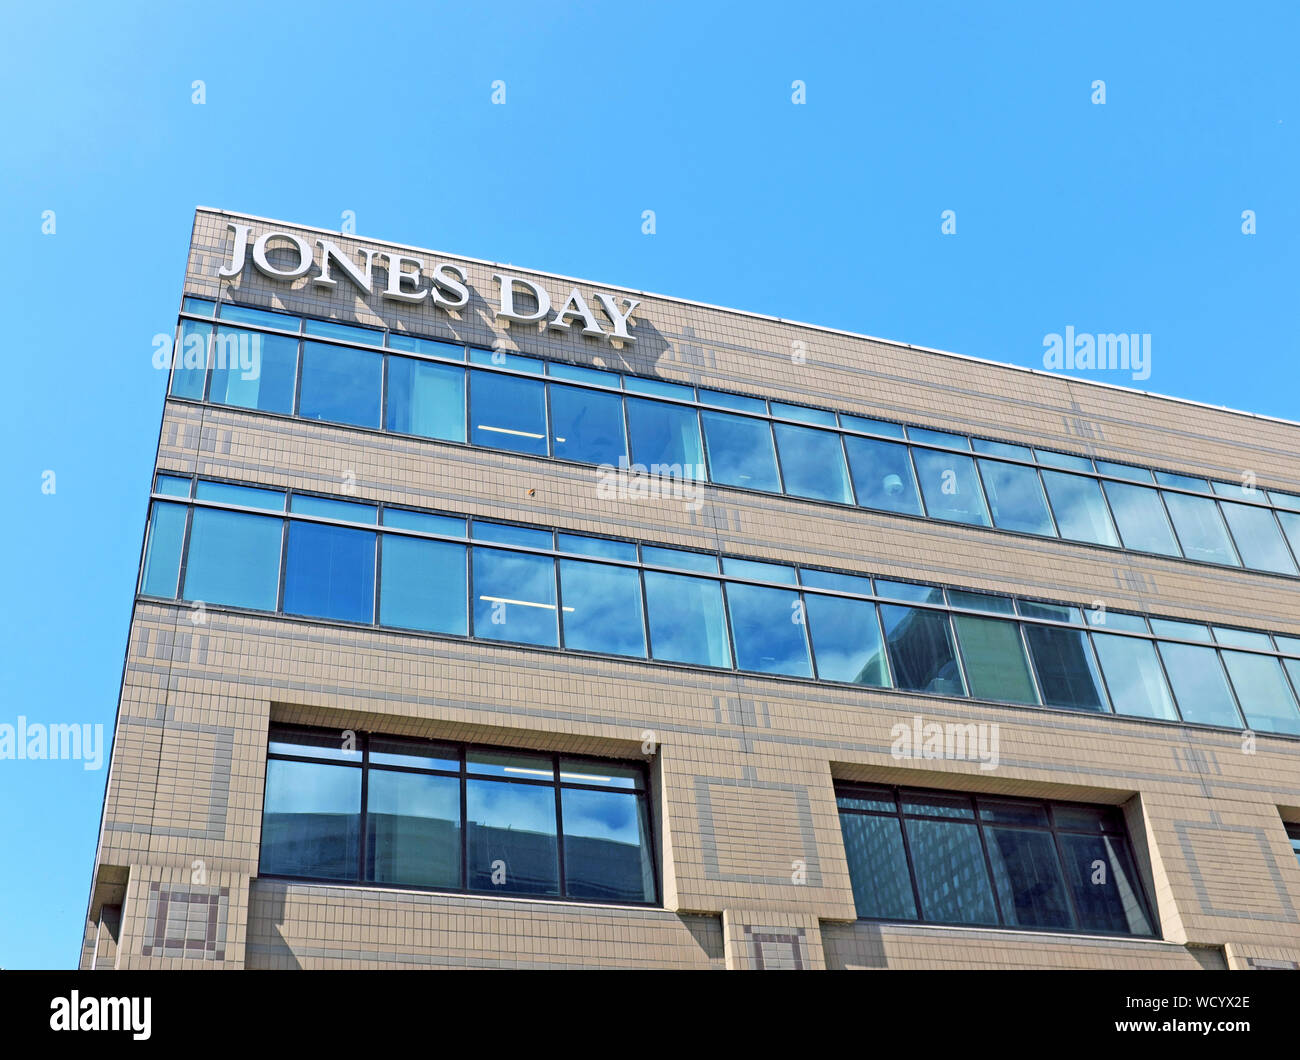 Jones Day, the international law firm, headquarters building in downtown Cleveland, Ohio, USA. Stock Photo